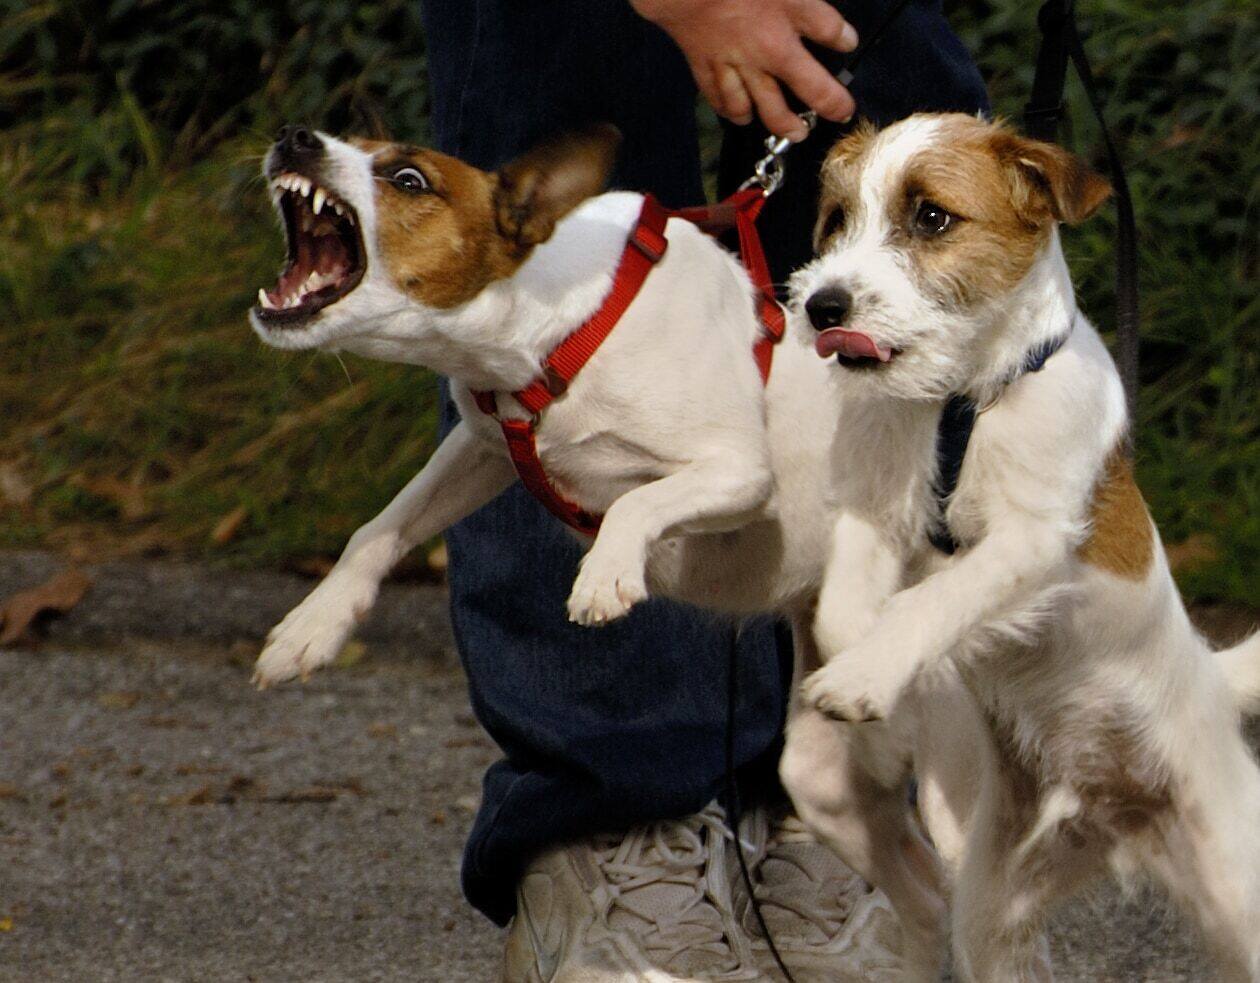 Jack Russell Terrier on a harness baring teeth next to another dog, while owner holds both back.